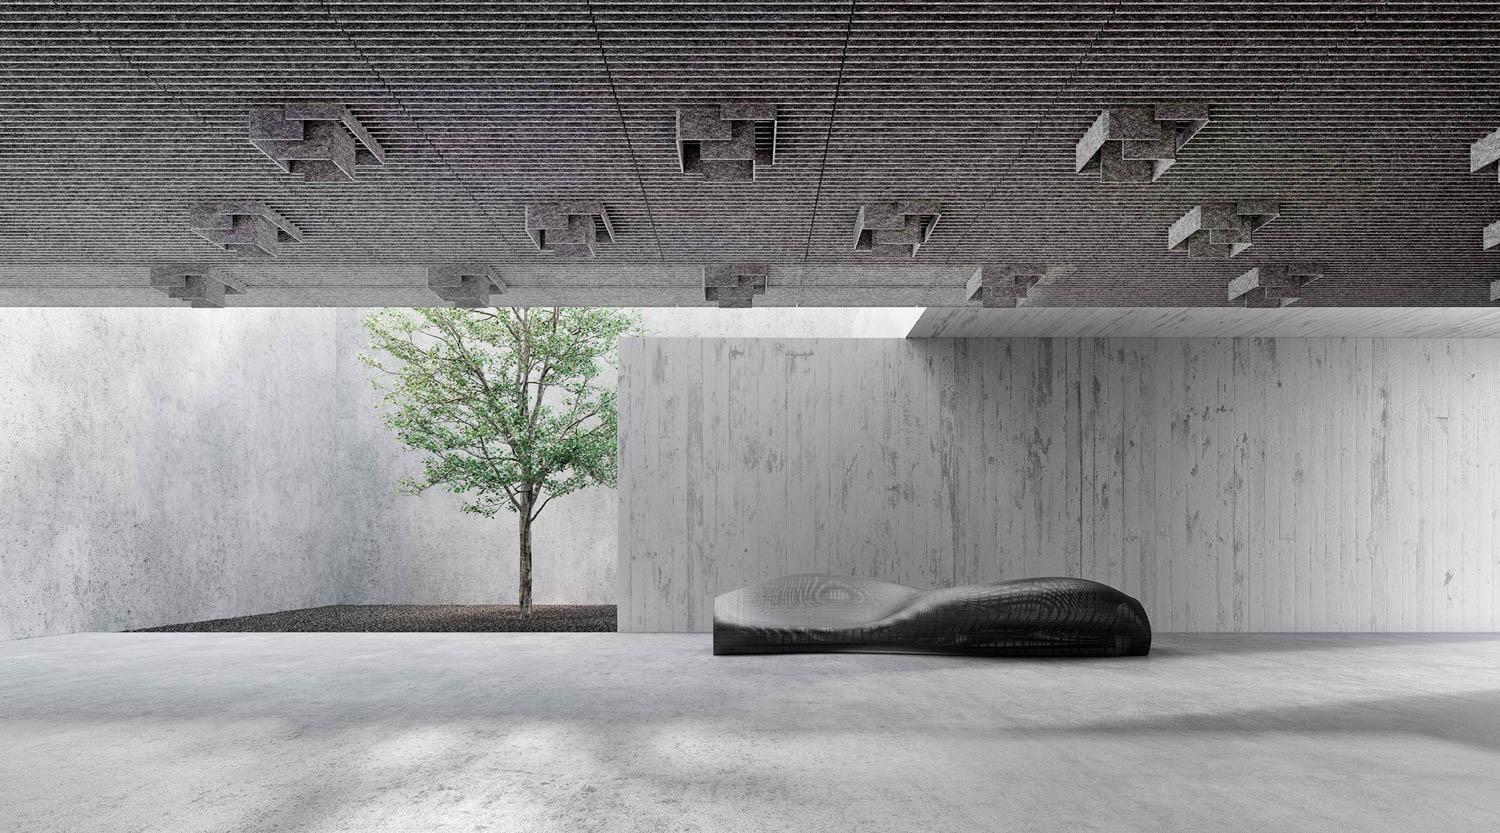 PET baffles in a gray open space with a tree